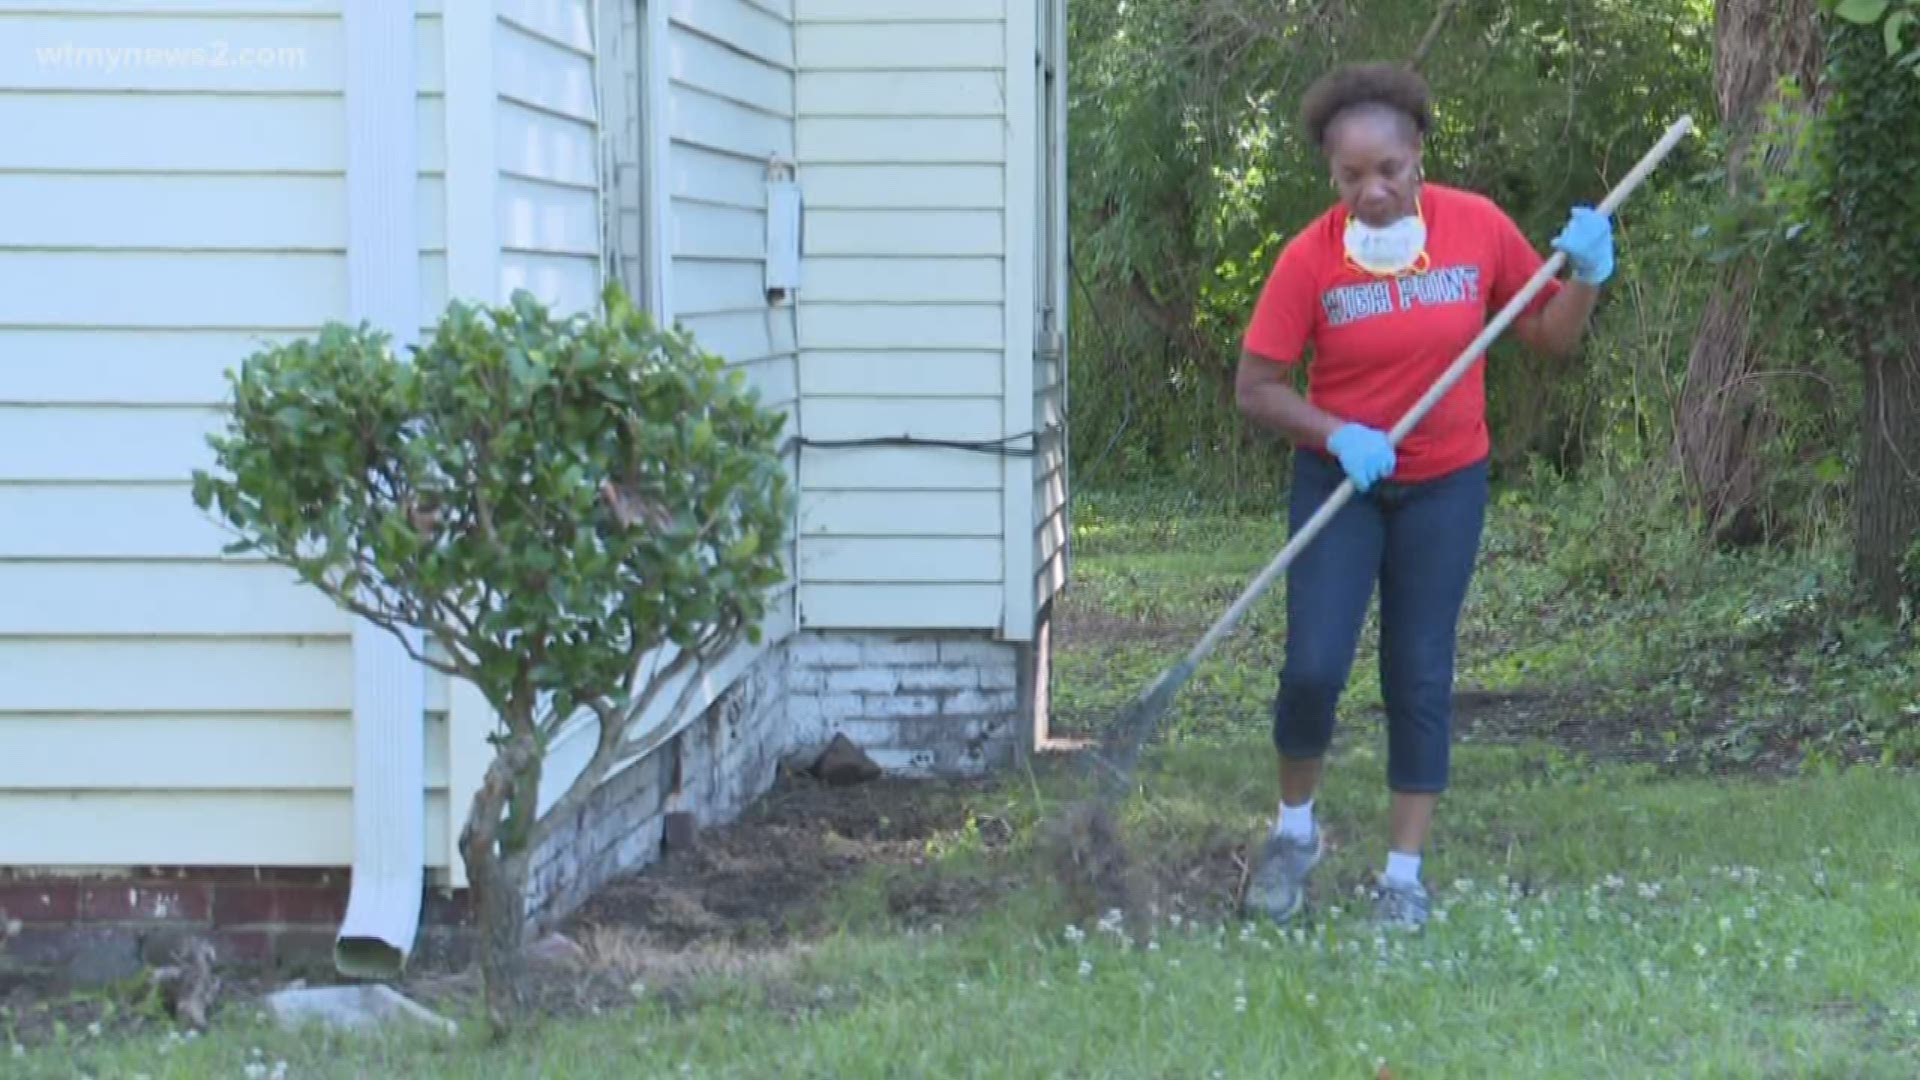 Lots of dusting, sweeping, and tidying up. It was a busy Saturday morning for community leaders in High Point who came together to jazz up legend John Coltrane's childhood home. The High Point Preservation Center Society headed the efforts.